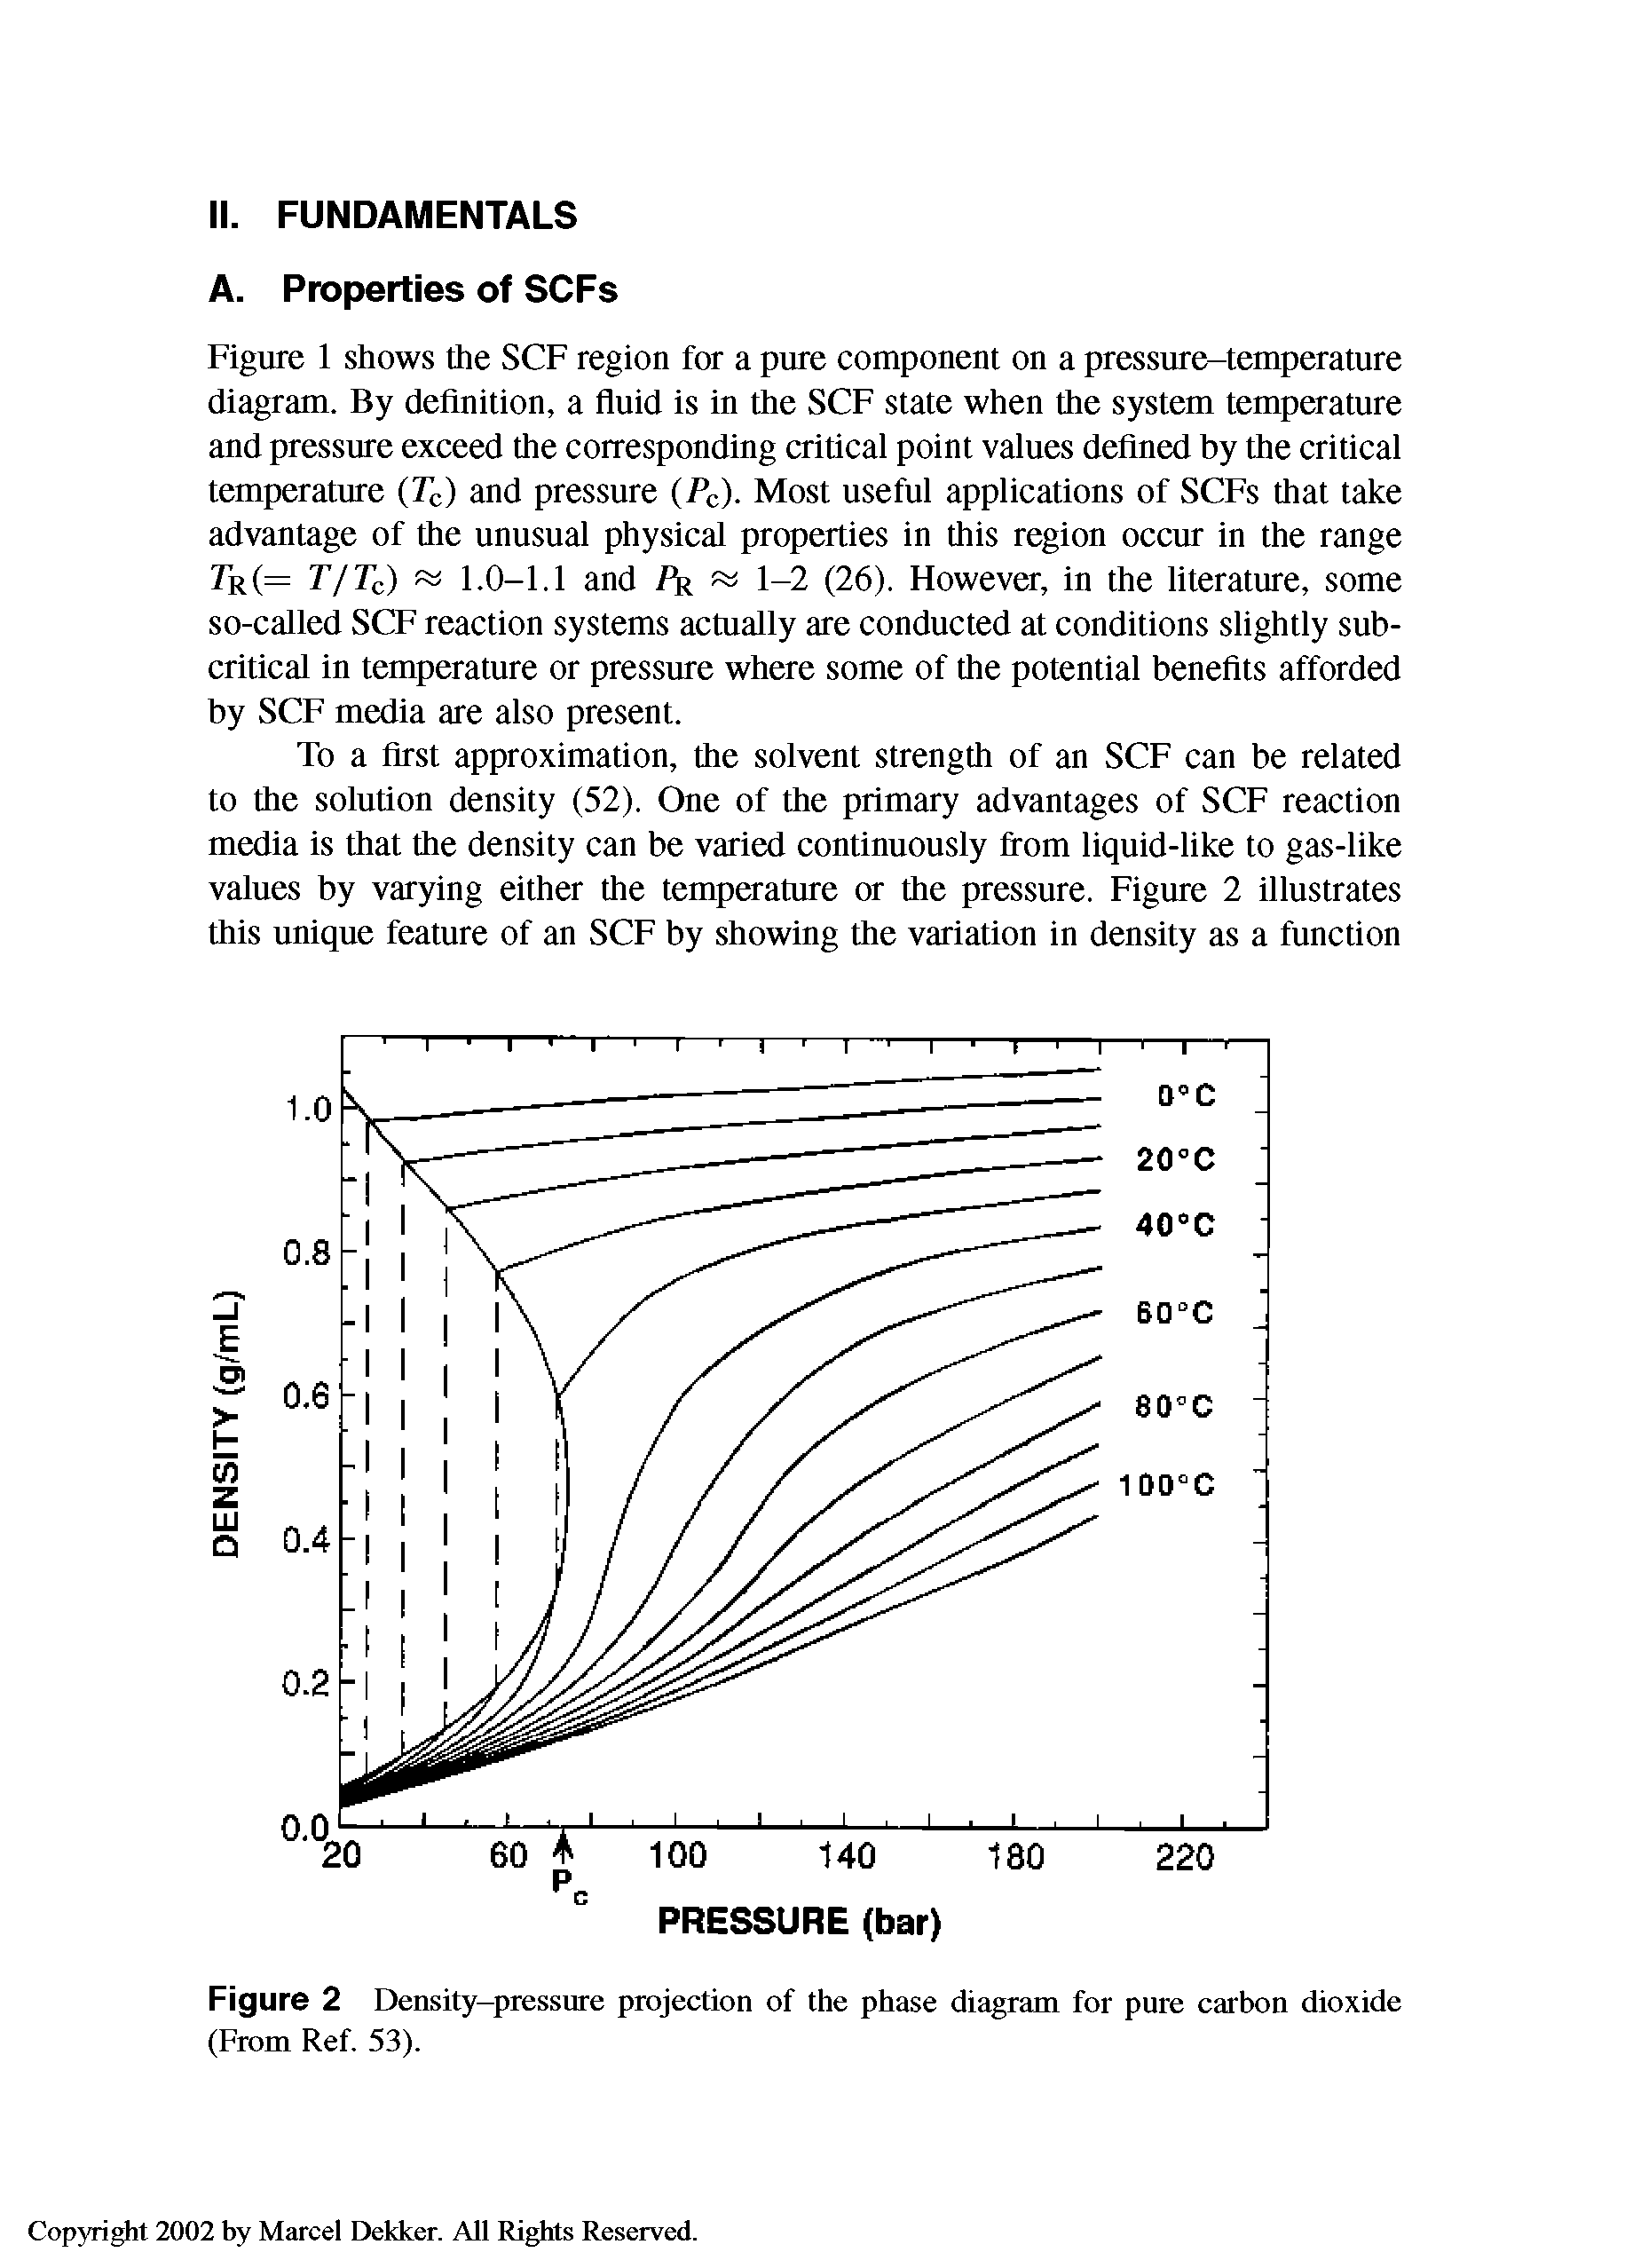 Figure 2 Density-pressure projection of the phase diagram for pure carbon dioxide (From Ref. 53).